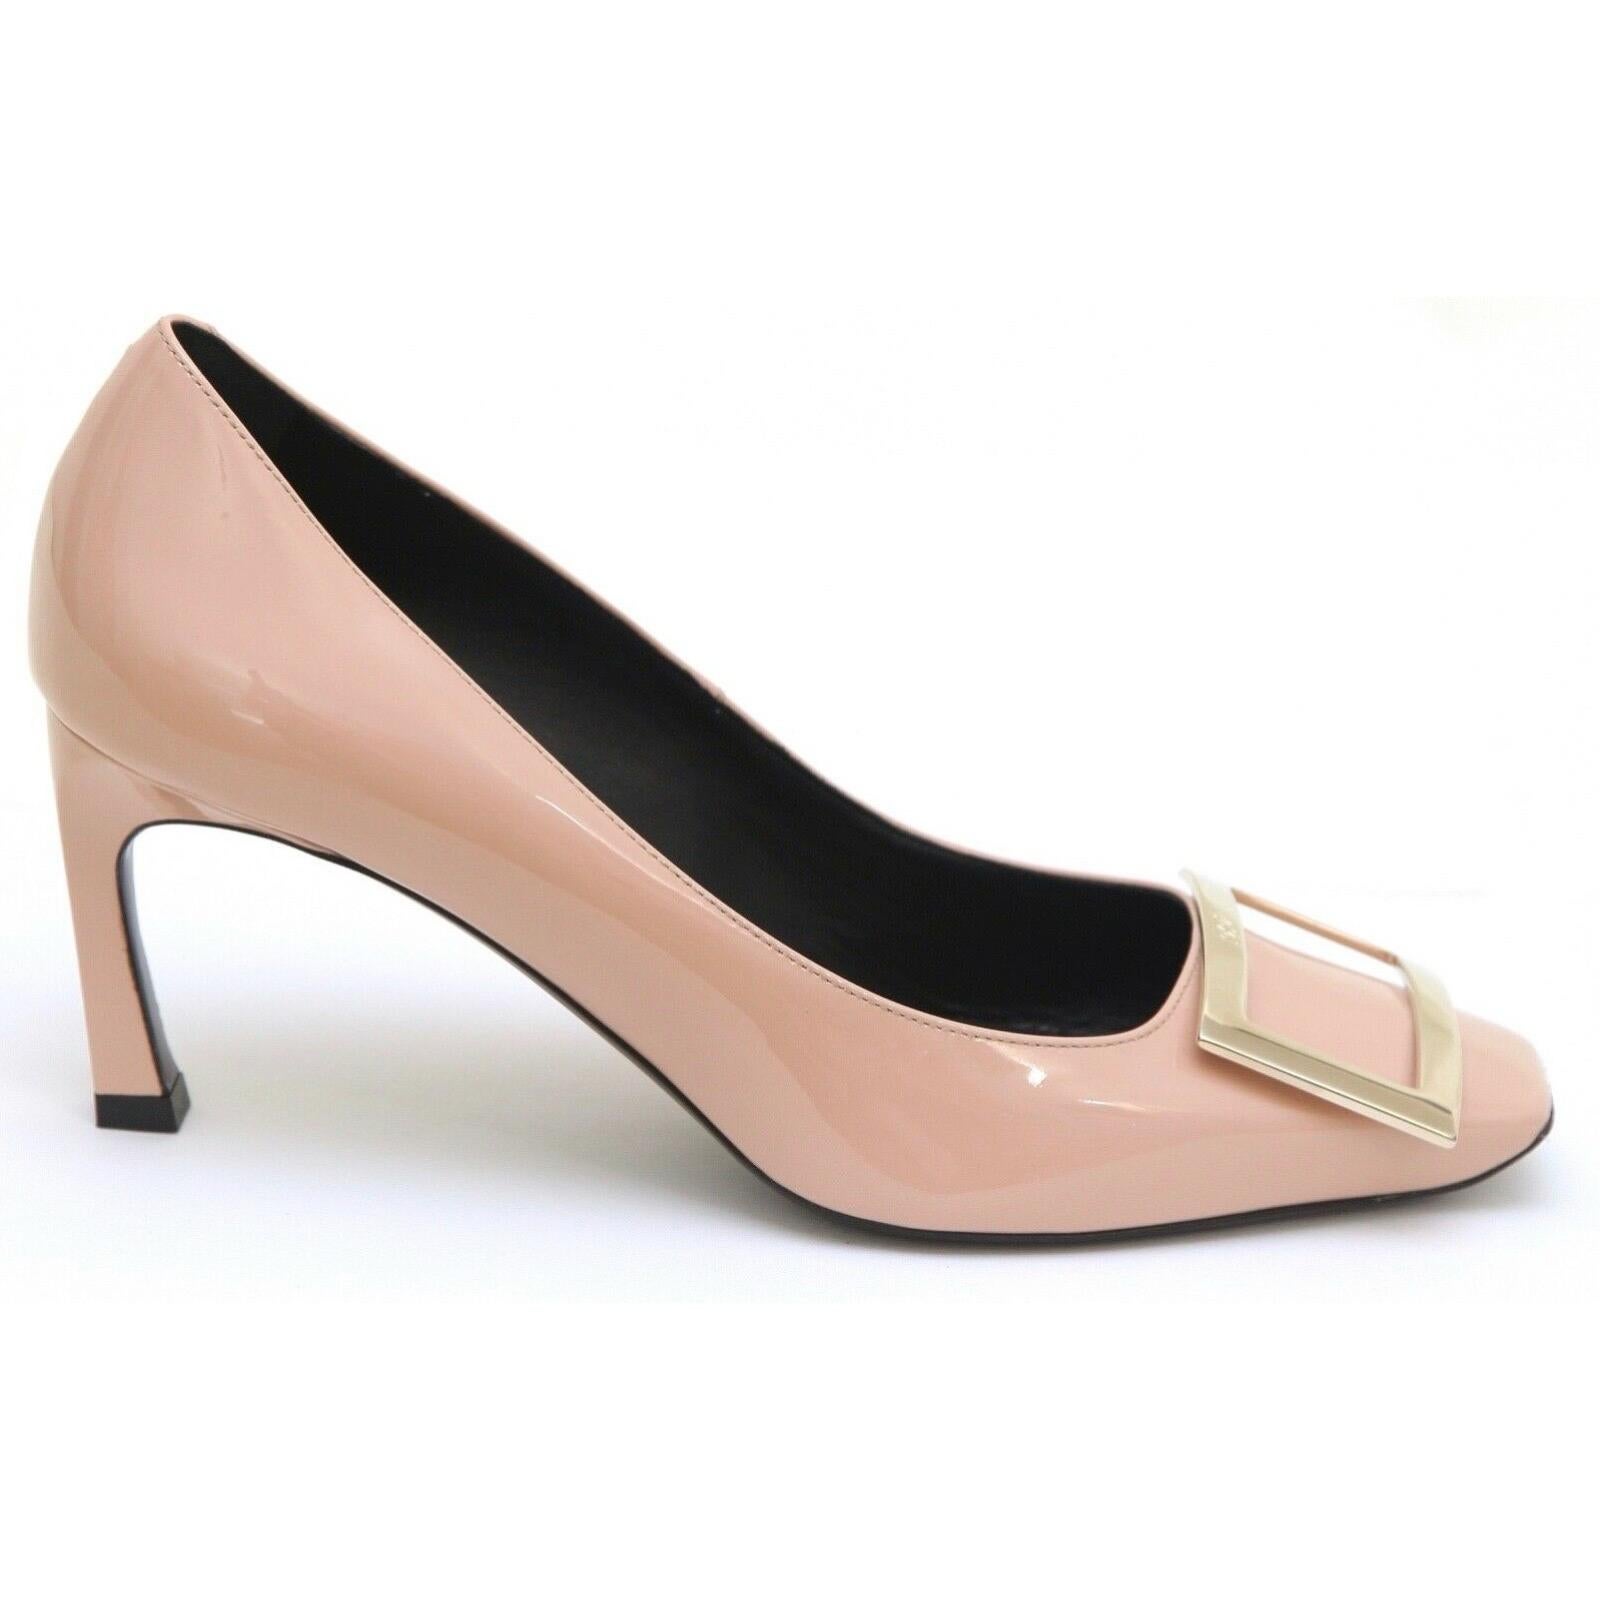 GUARANTEED AUTHENTIC ROGER VIVIER BELLE VIVIER TROMPETTE LEATHER PUMPS

Retails excluding sales taxes $775

Design:
- Nude blush patent leather upper.
- Gold-tone pilgrim buckle over vamp.
- Square toe.
- Leather insole and sole.
- Comes with